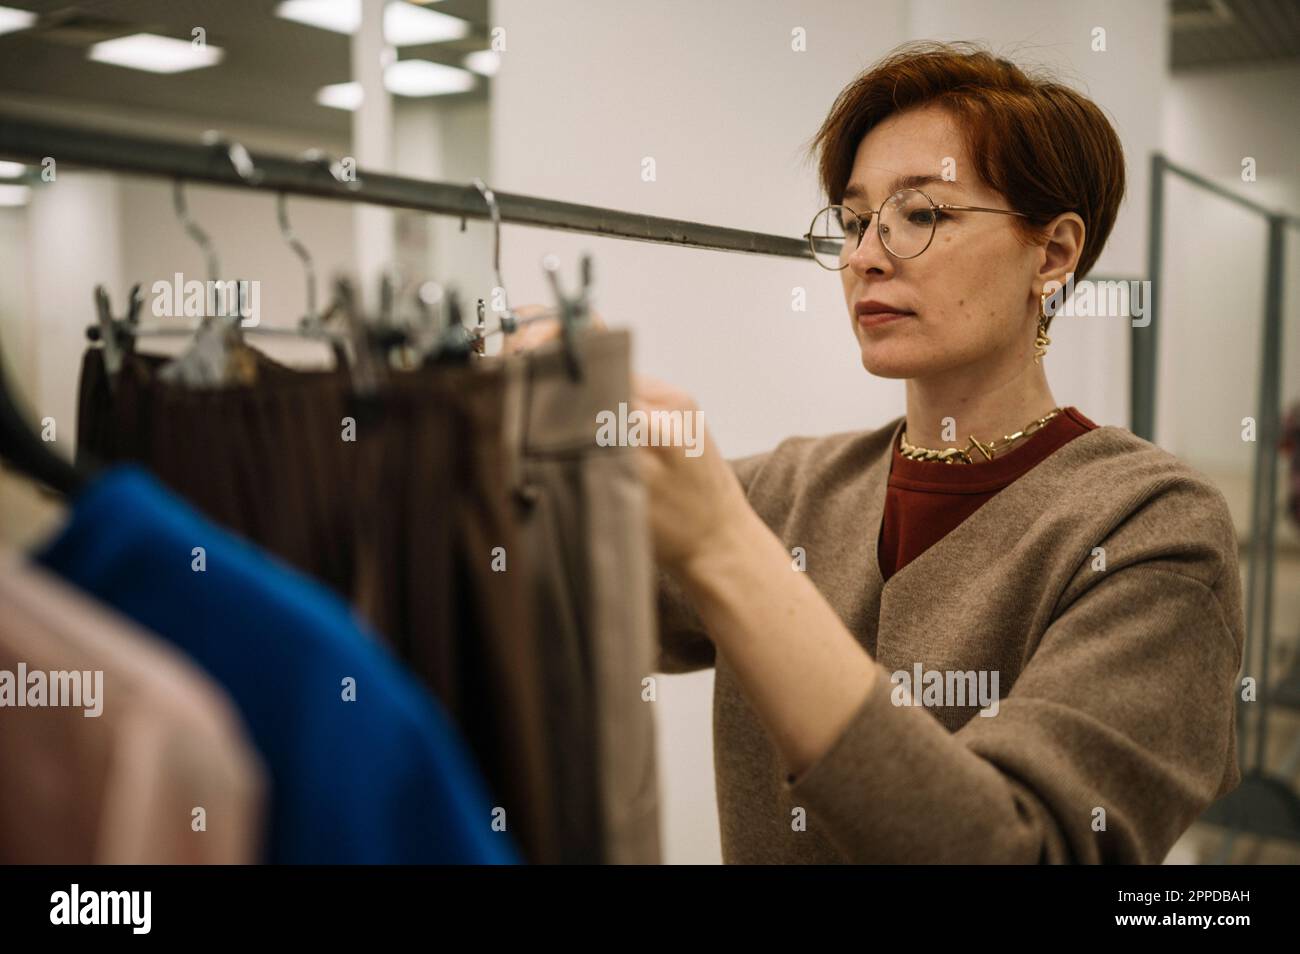 Woman wearing eyeglasses working in clothes store Stock Photo